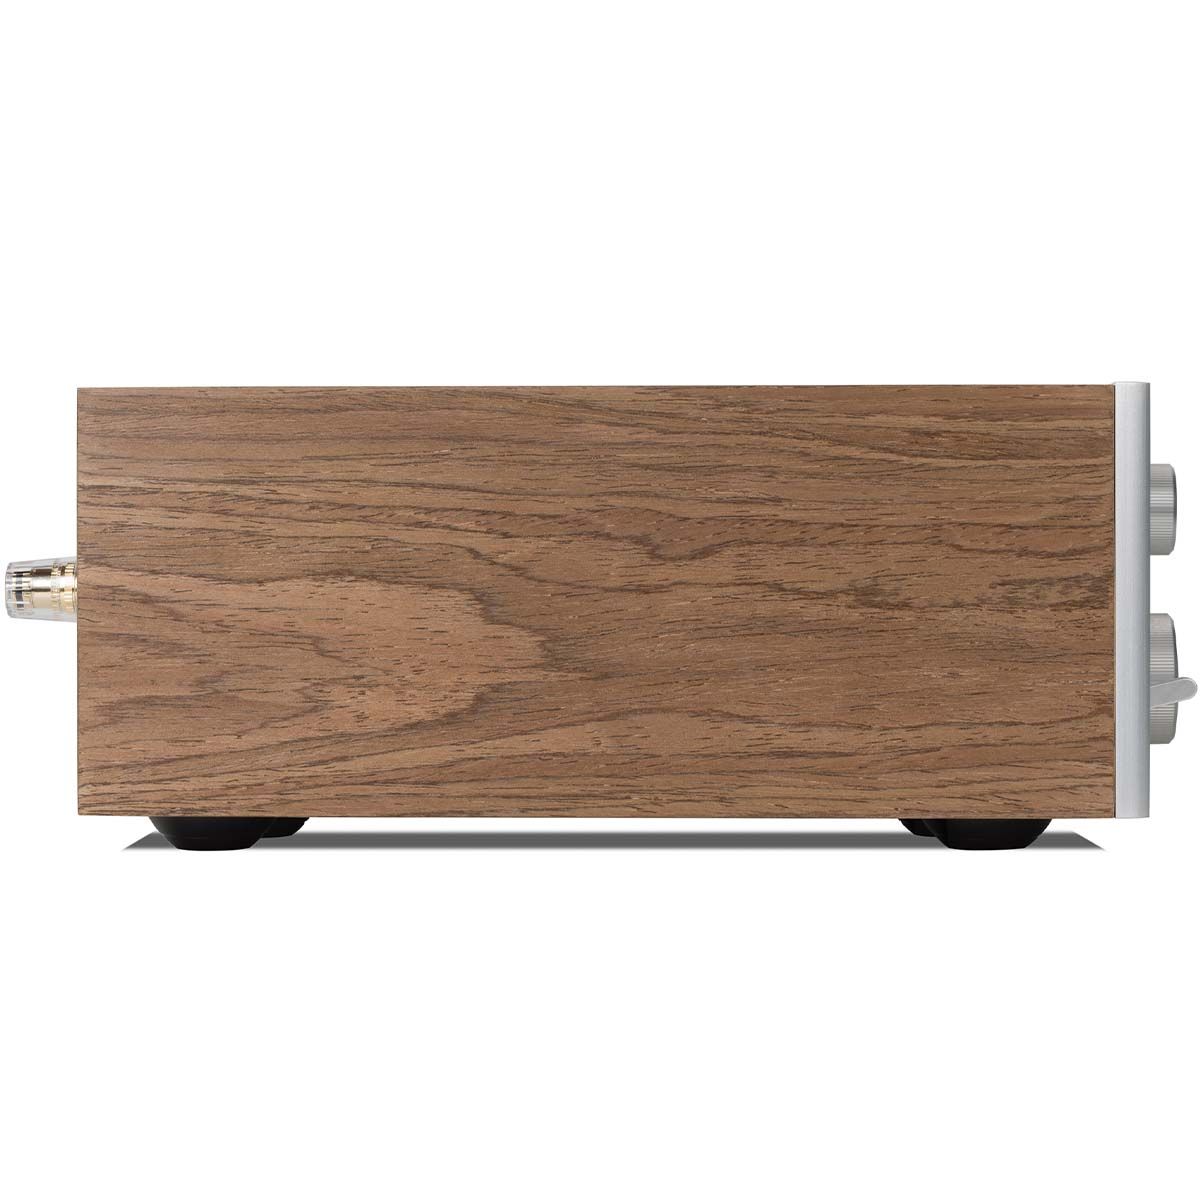 JBL SA750 Streaming Integrated Stereo Amplifier - Walnut left side view